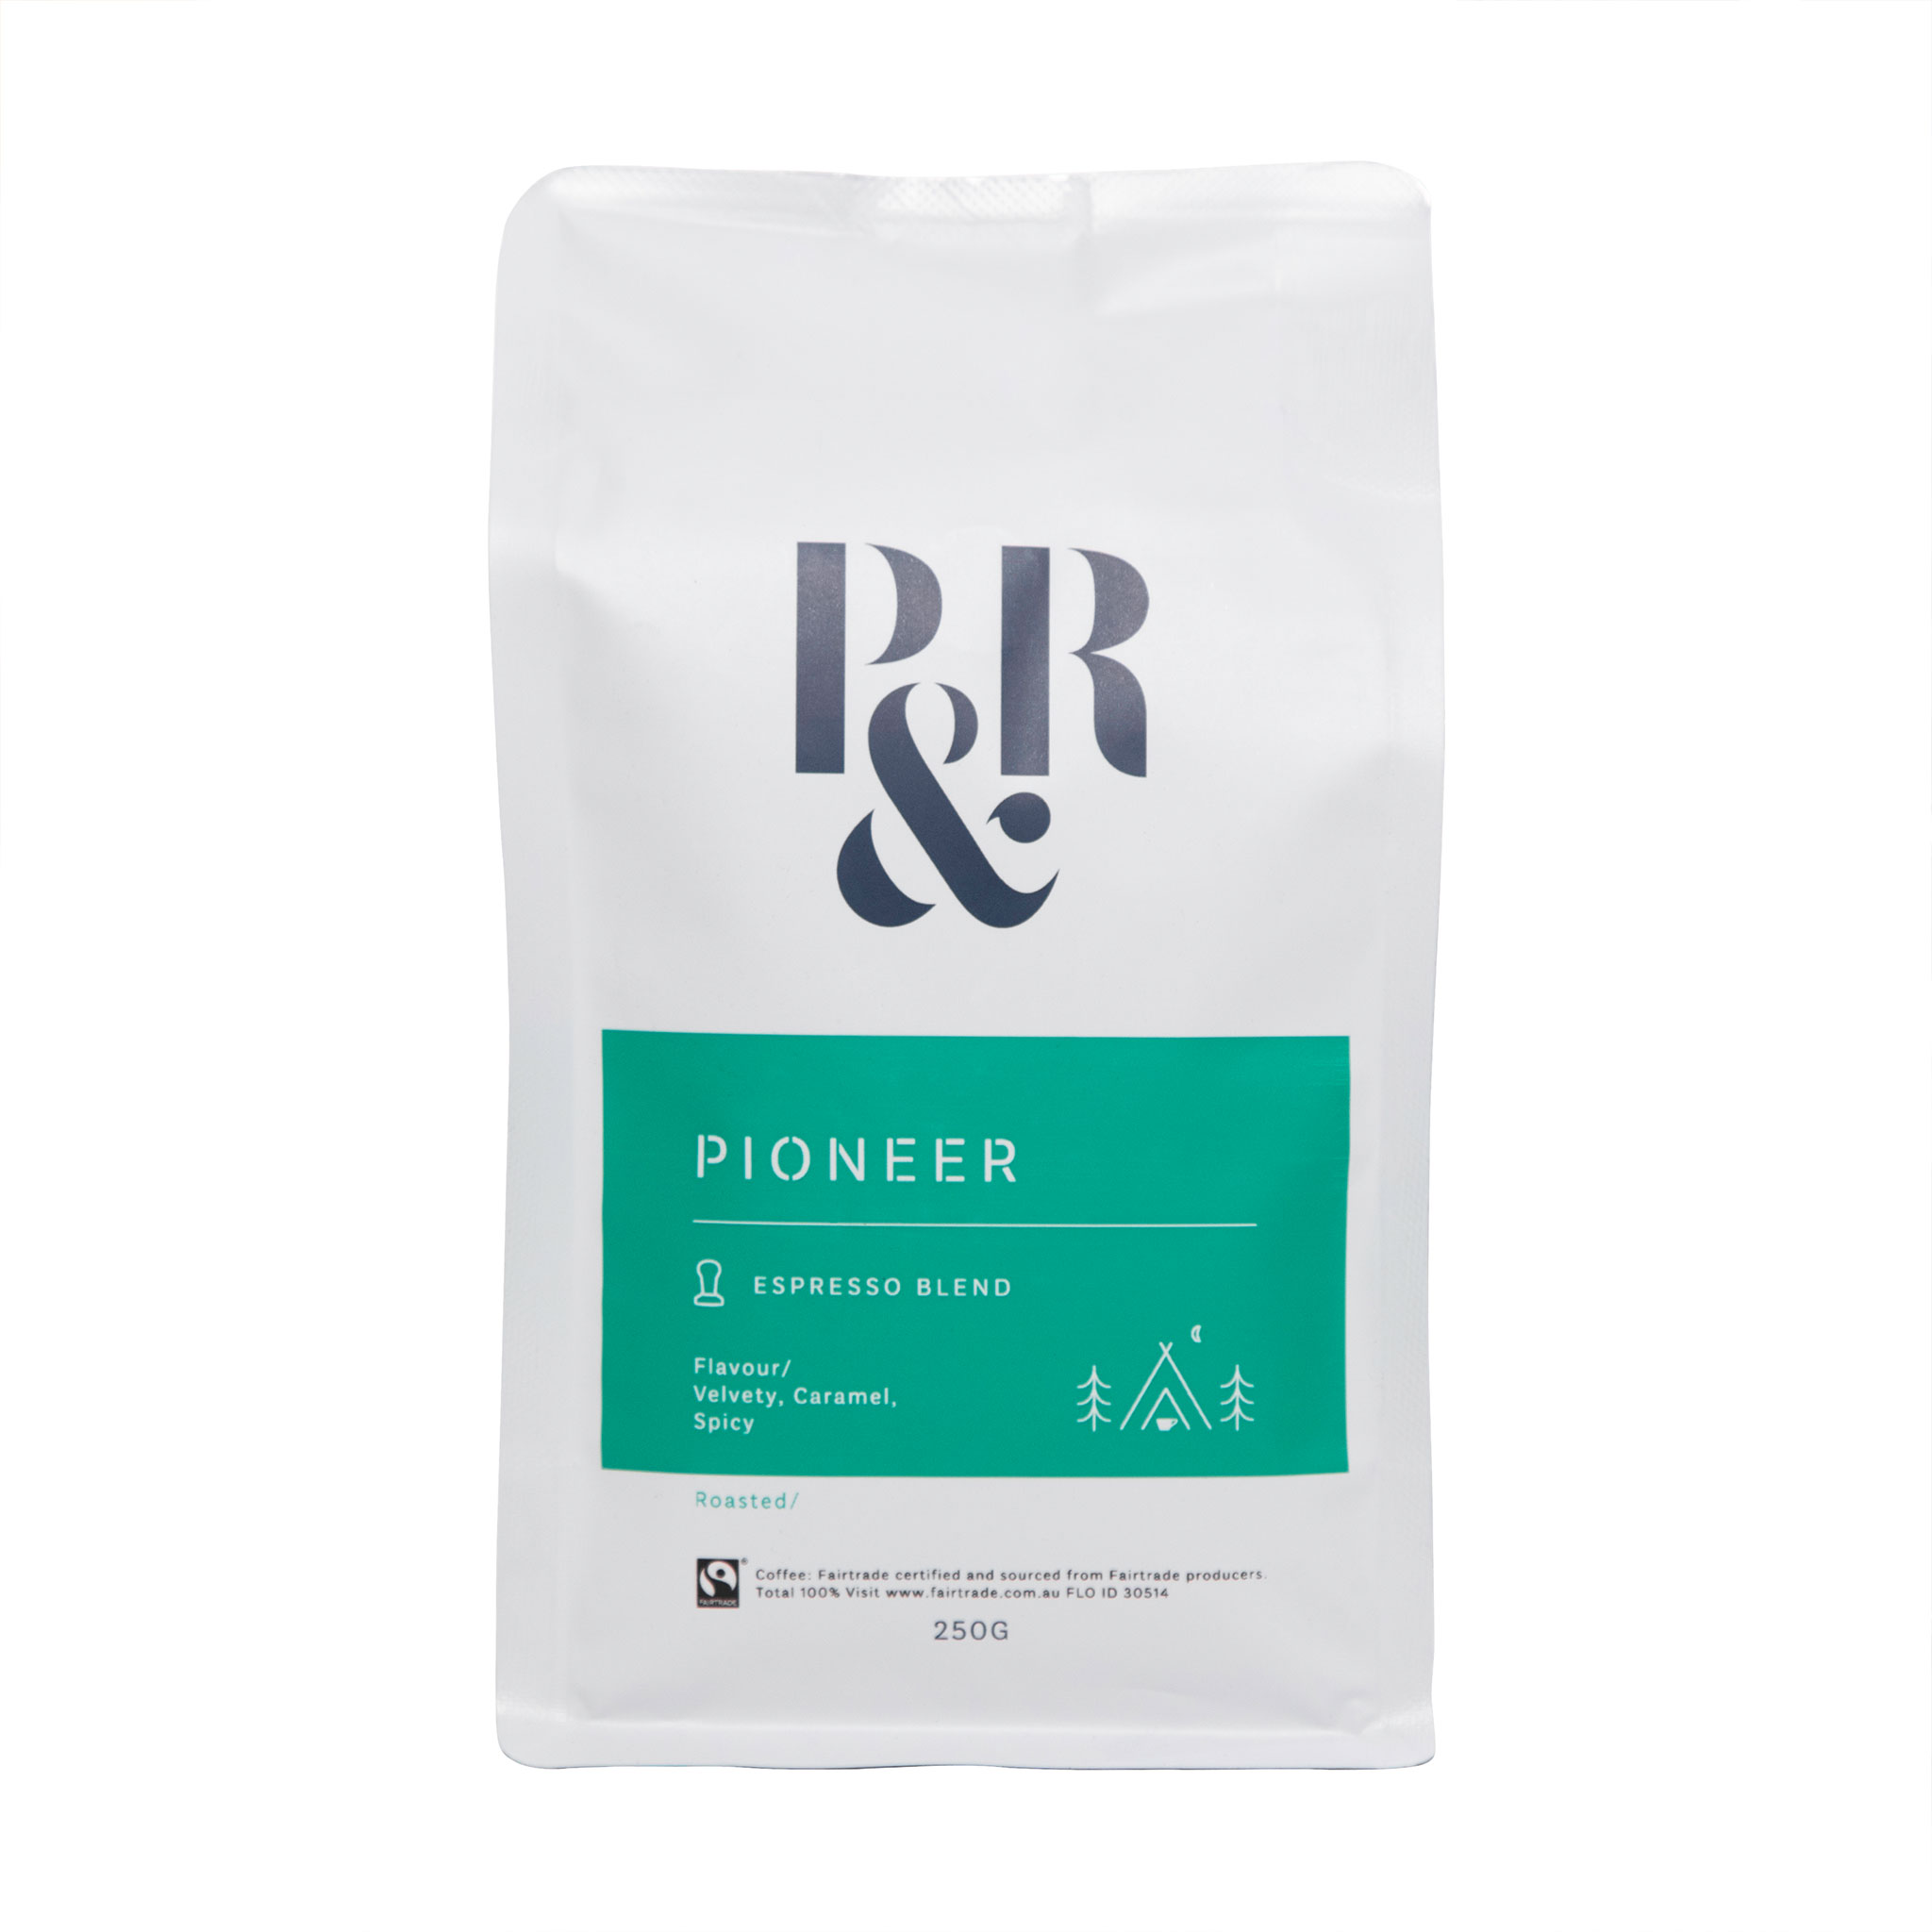 A bag of Pablo & Rusty’s Pioneer Blend 250G coffee beans. The bag is white with a green text box listing flavour notes as Velvety, Caramel, and Spicy. Underneath is the Fairtrade logo and the text “Coffee: Fairtrade certified and sourced from Fairtrade producers. Total 100%